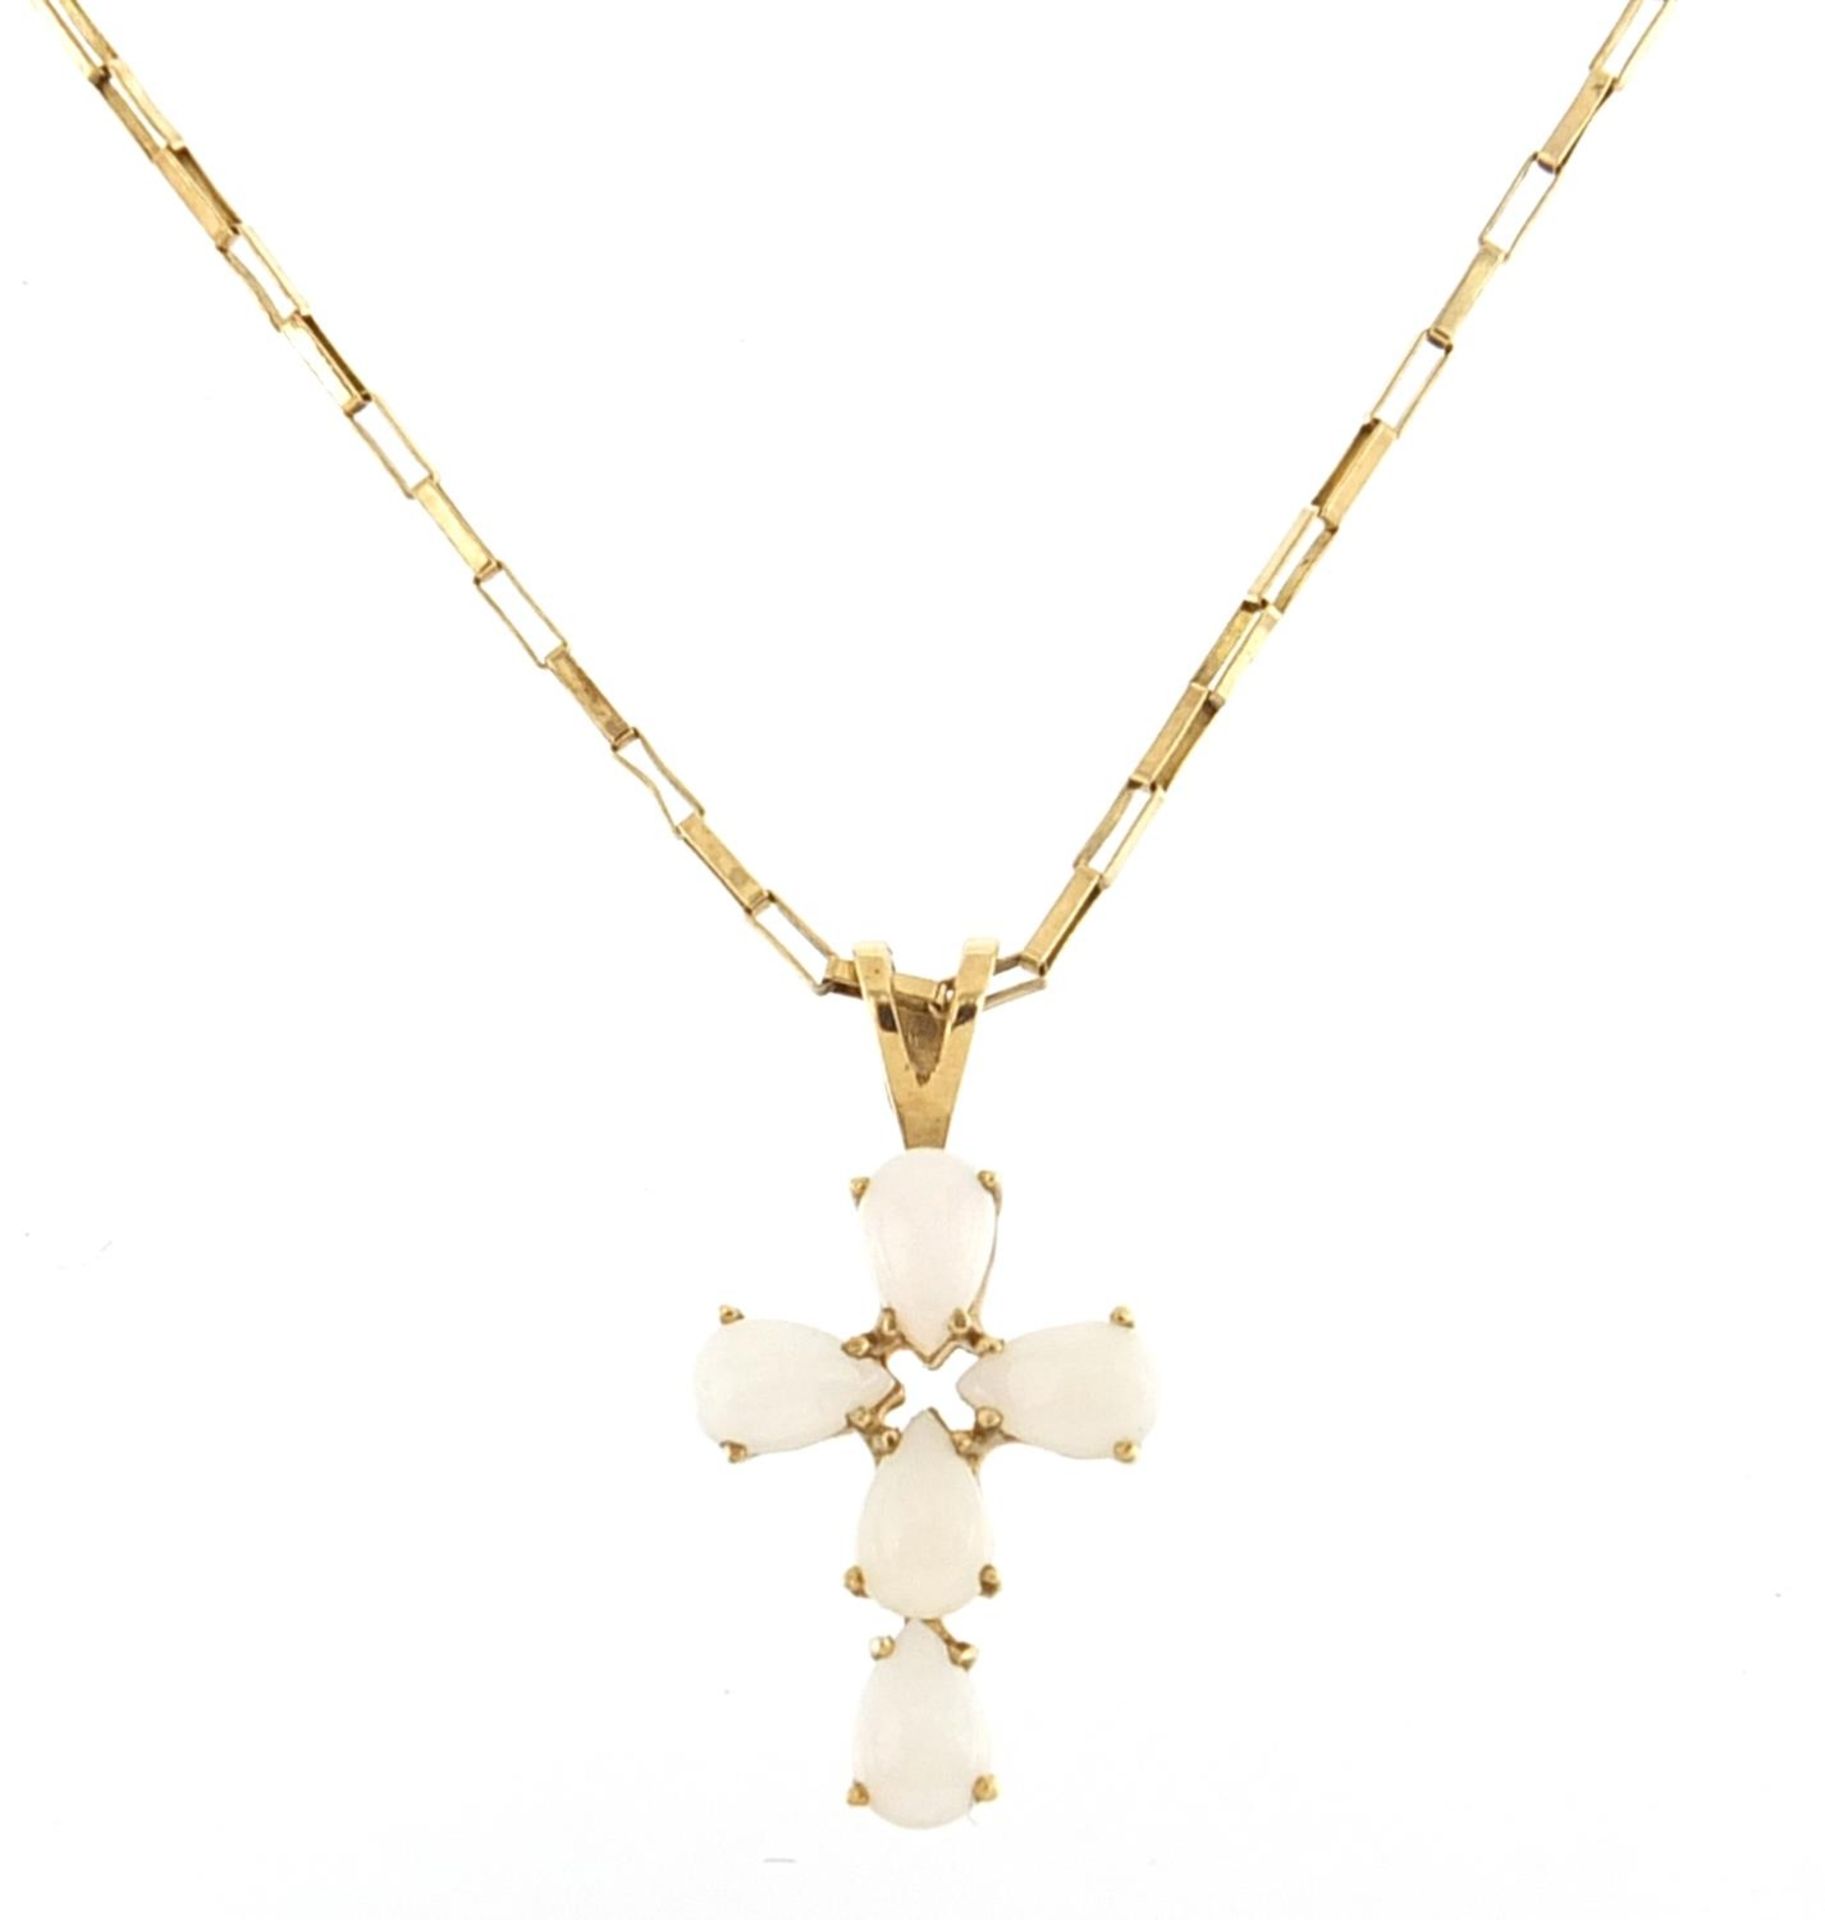 9ct gold opal cross pendant on a 9ct gold necklace, 2.6cm high and 47cm in length, 3.3g